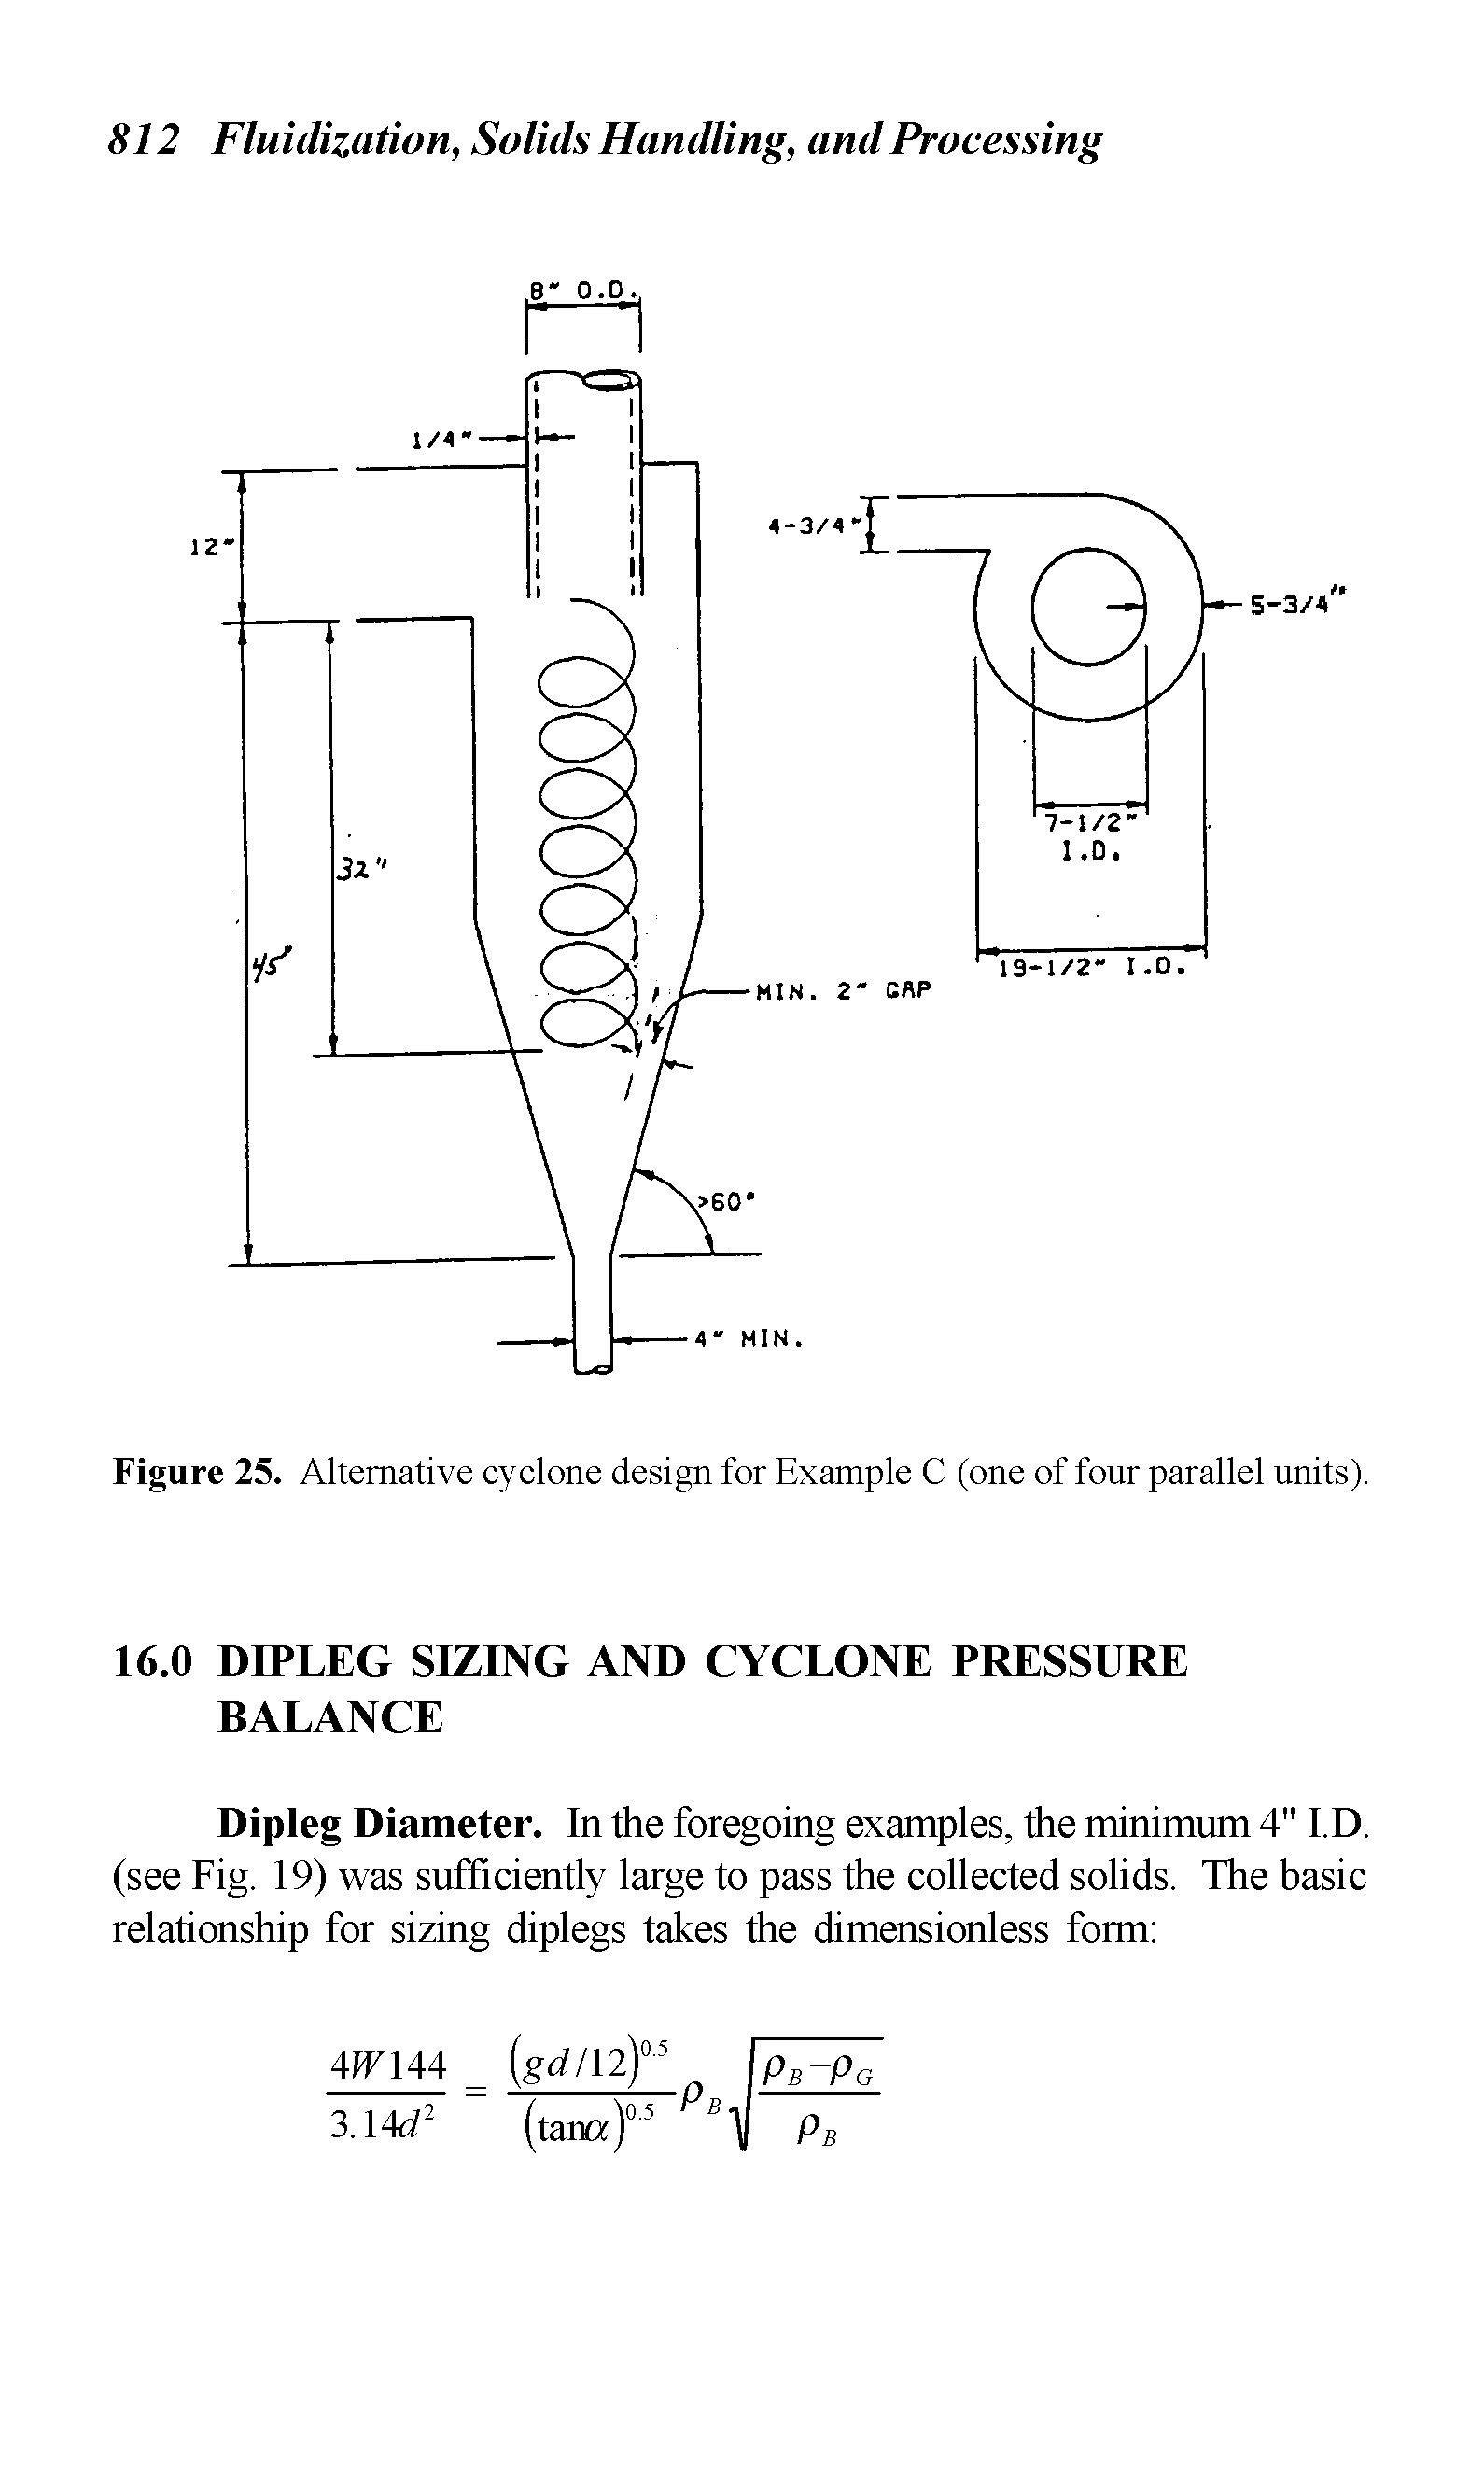 Figure 25. Alternative cyclone design for Example C (one of four parallel units).